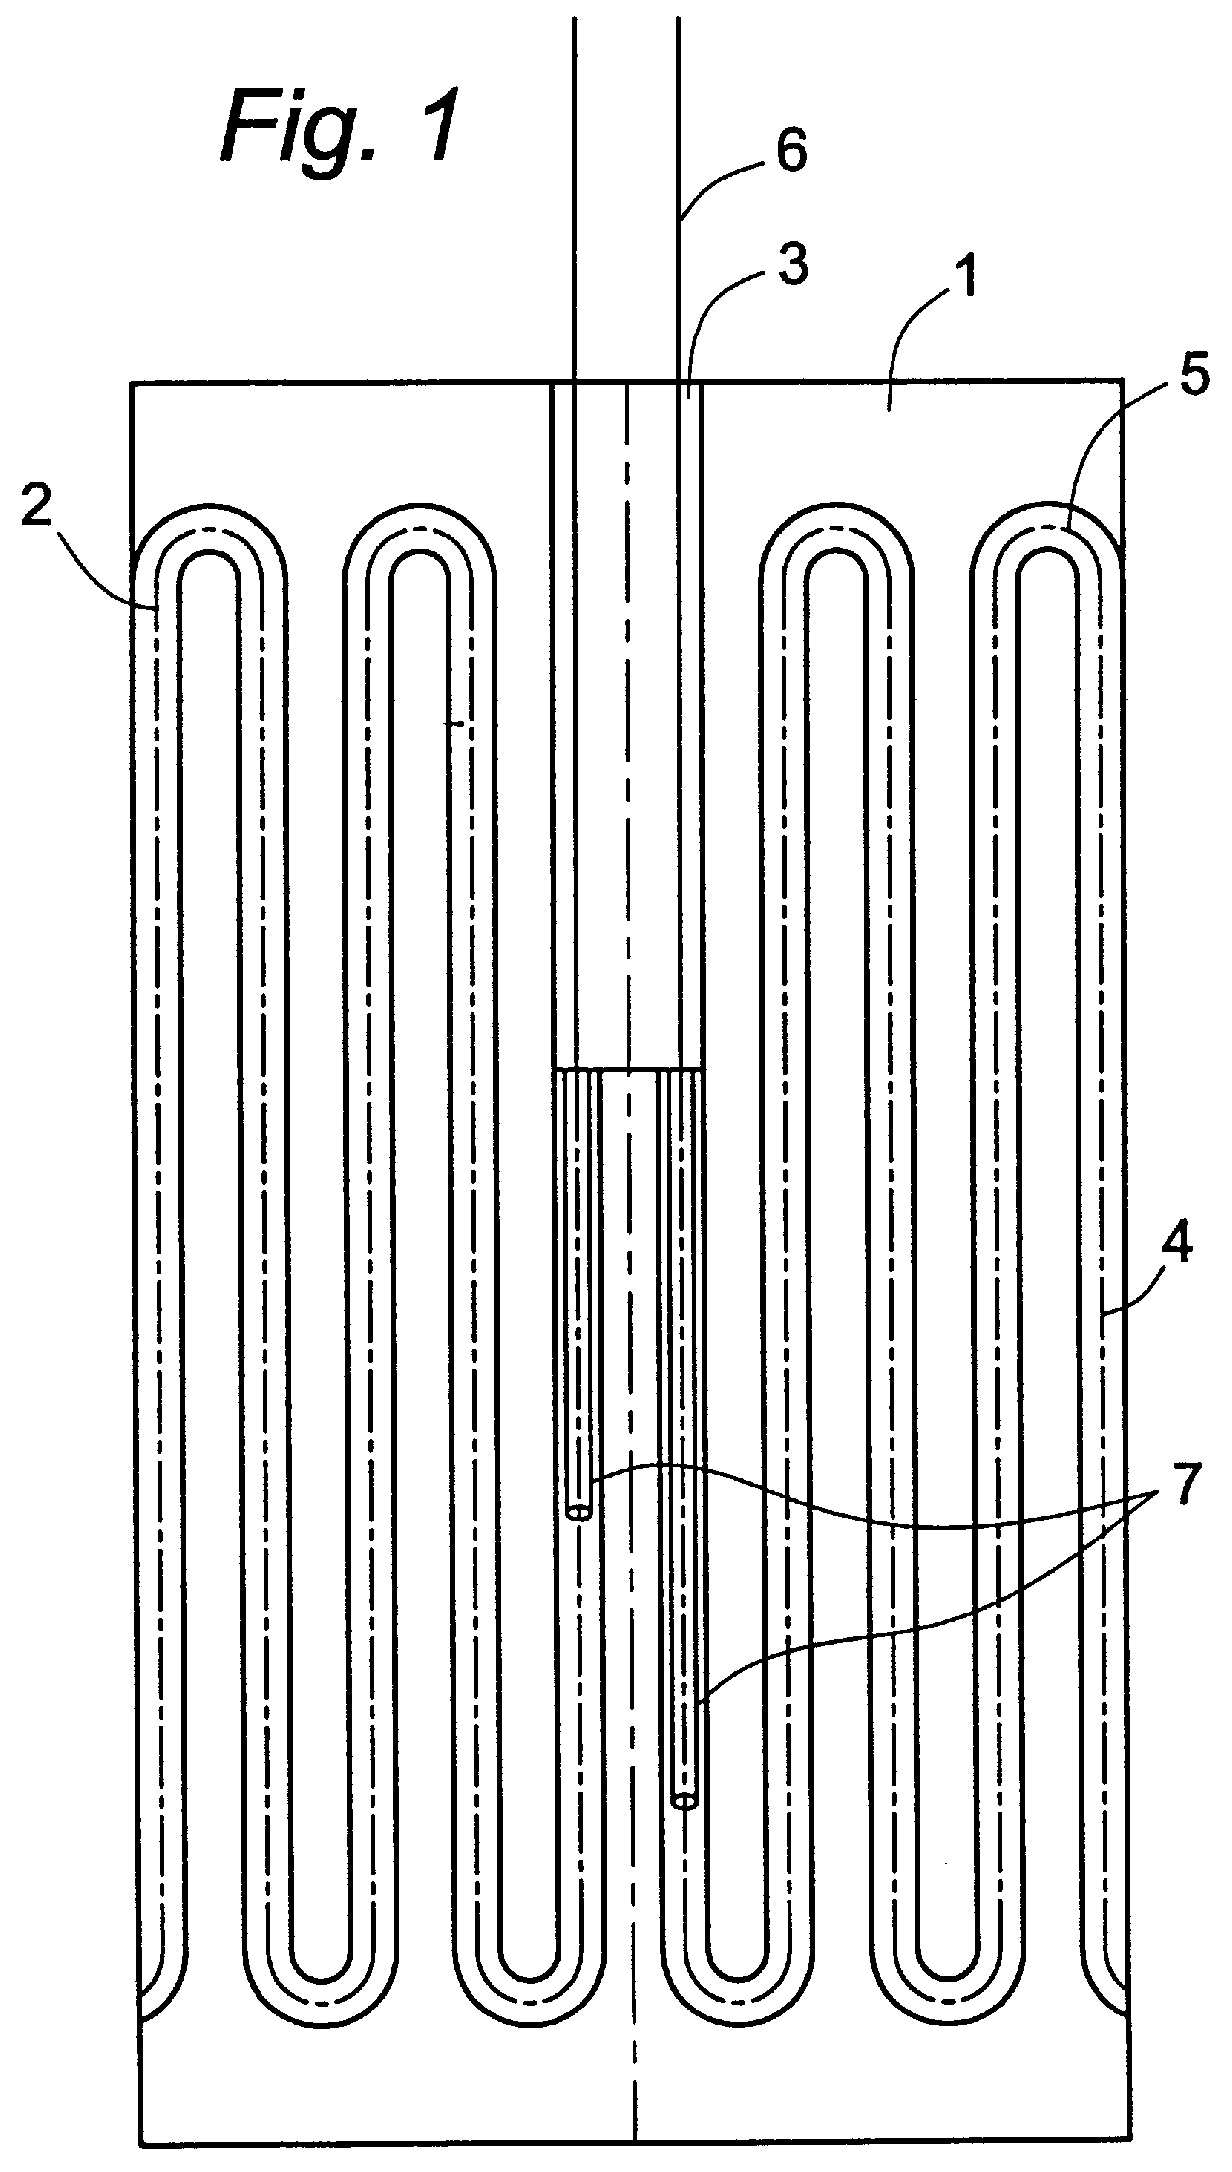 Cartridge heater for a gas chromatography transfer device